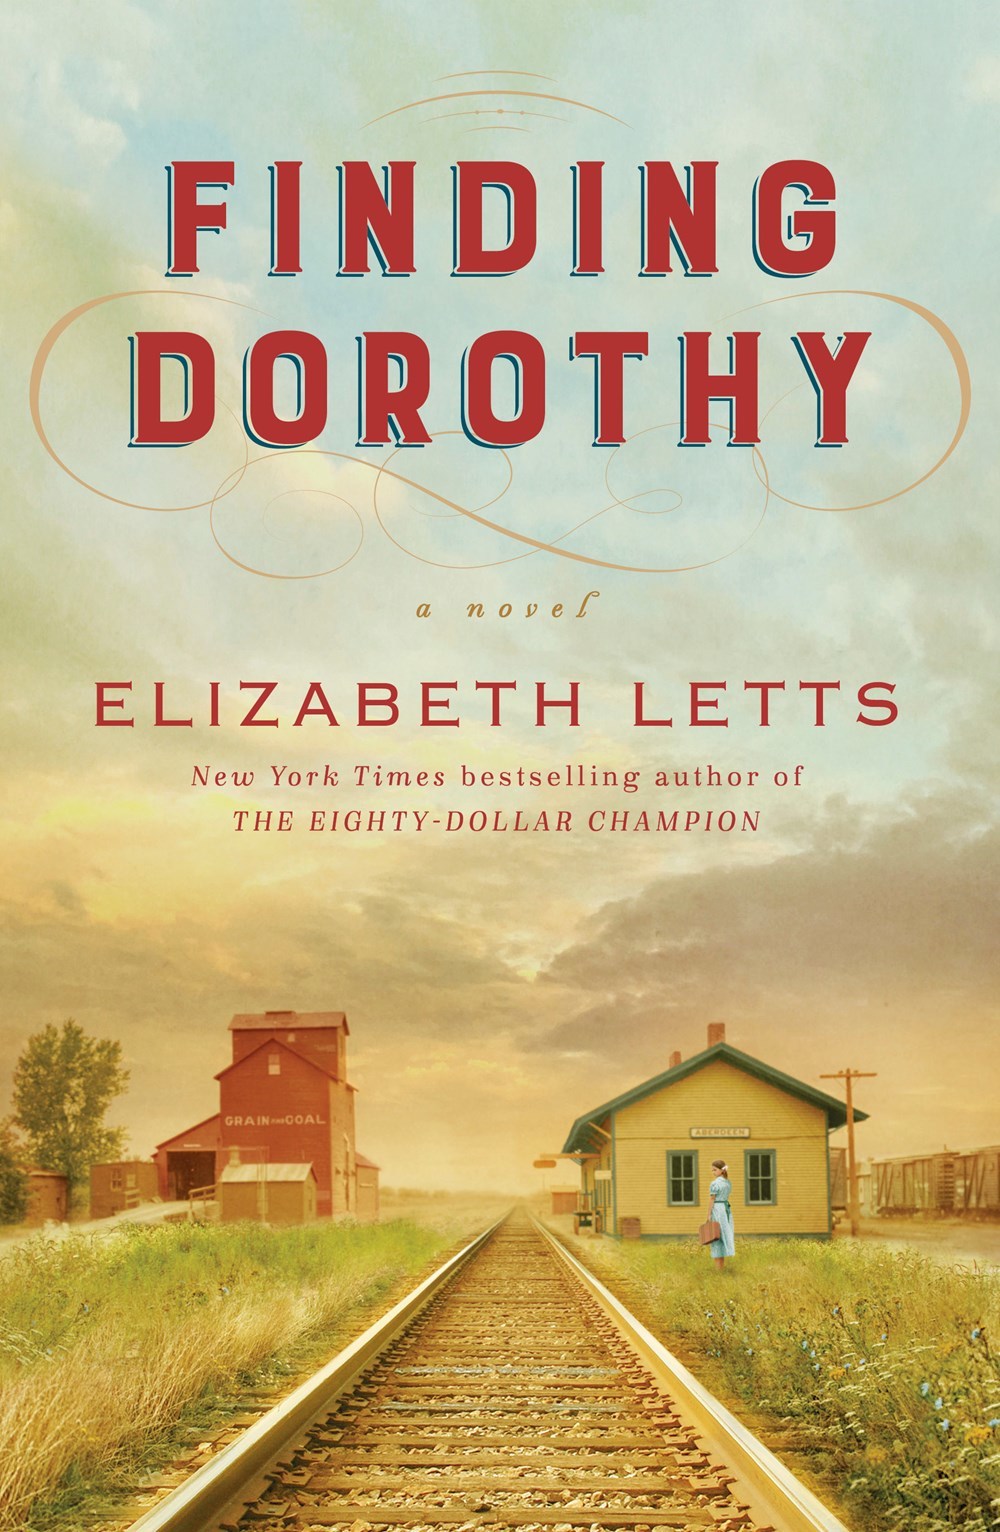 book cover of Finding Dorothy by Elizabeth Letts: train track leading to a house with a tornado in the distance